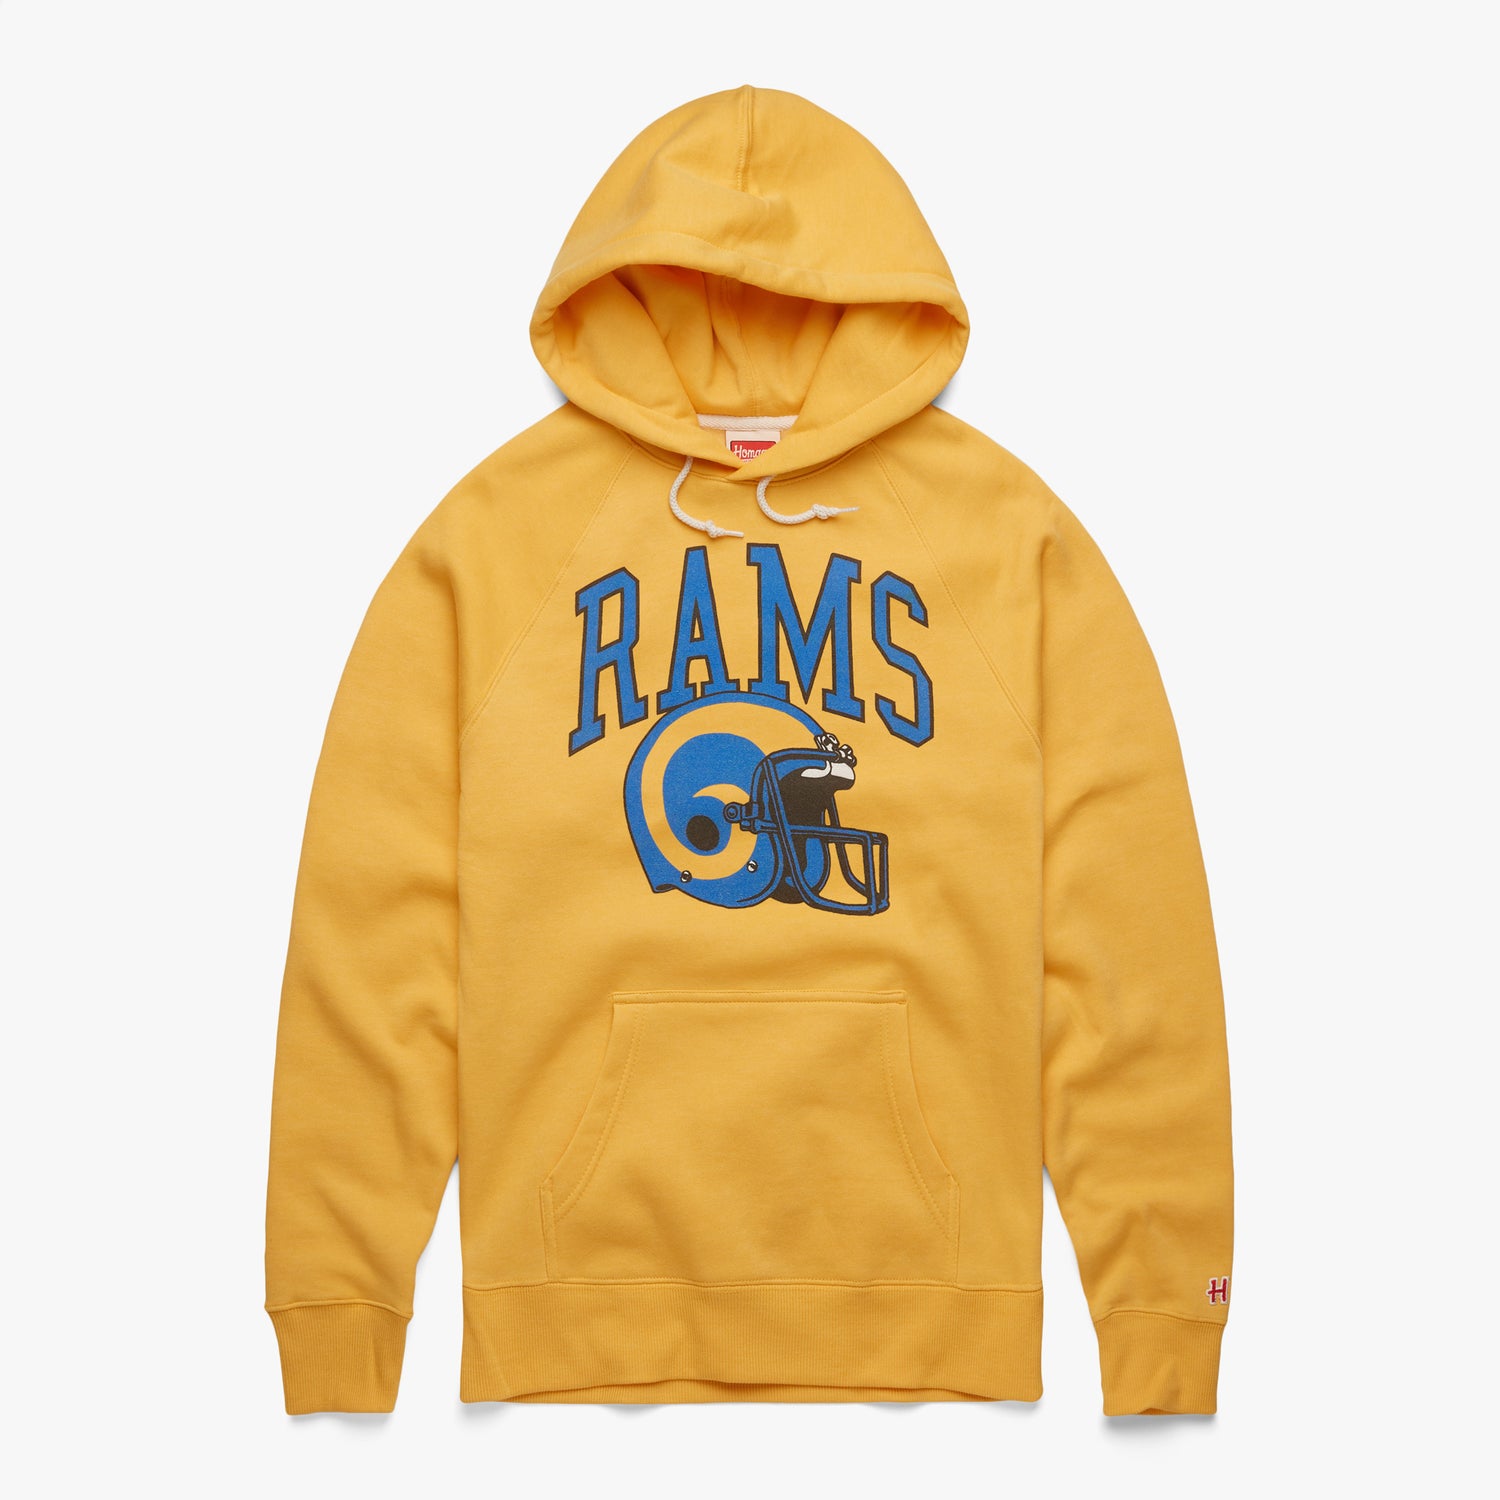 Los Angeles Rams Helmet Retro Hoodie from Homage. | Officially Licensed Vintage NFL Apparel from Homage Pro Shop.